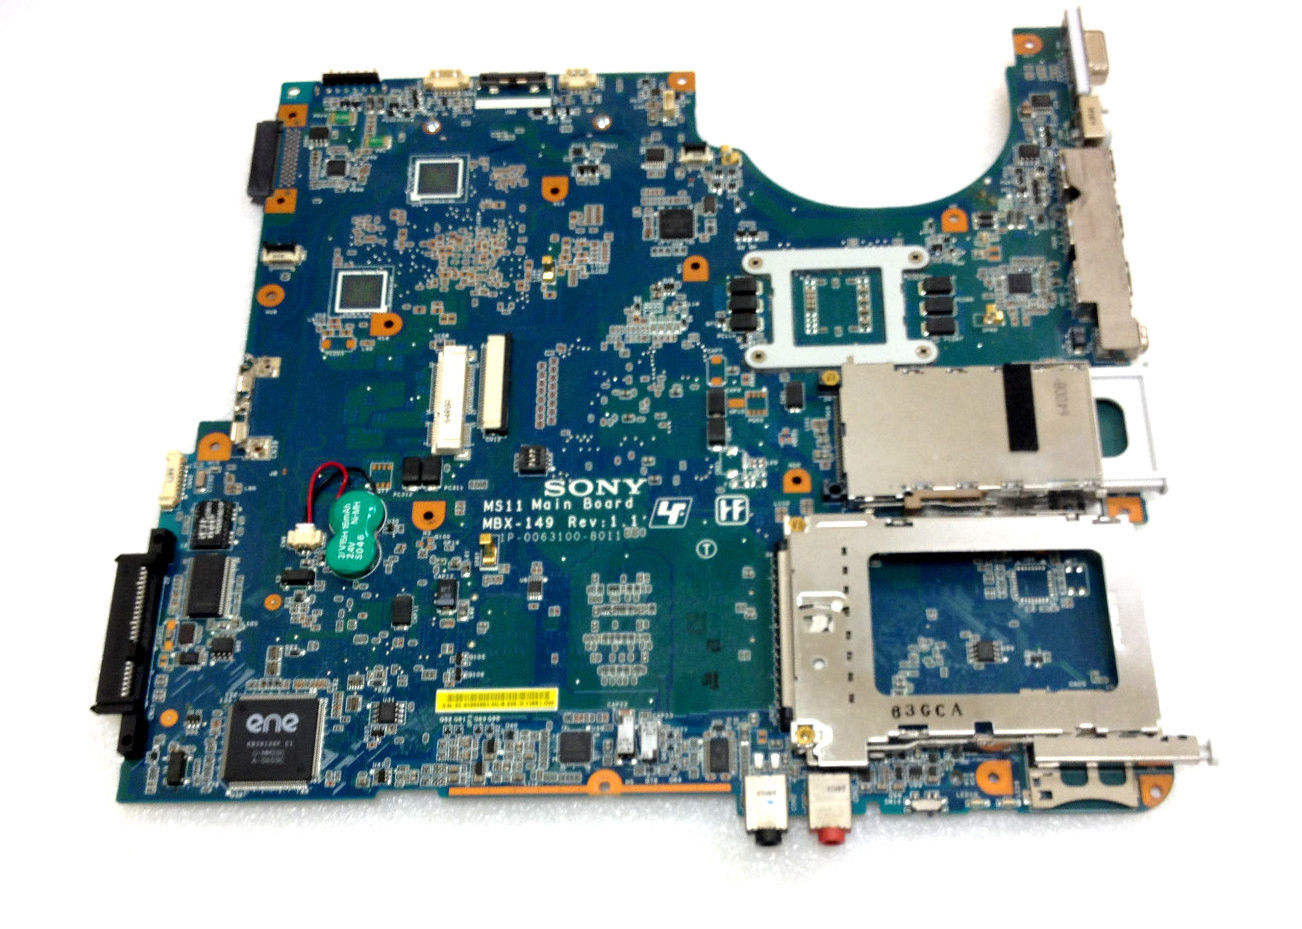 A1229523A Sony Vaio VGN-FE MBX-149 intel Motherboard 1P-006B500-8011 GENUINE Compatible CPU Brand: Intel Nu